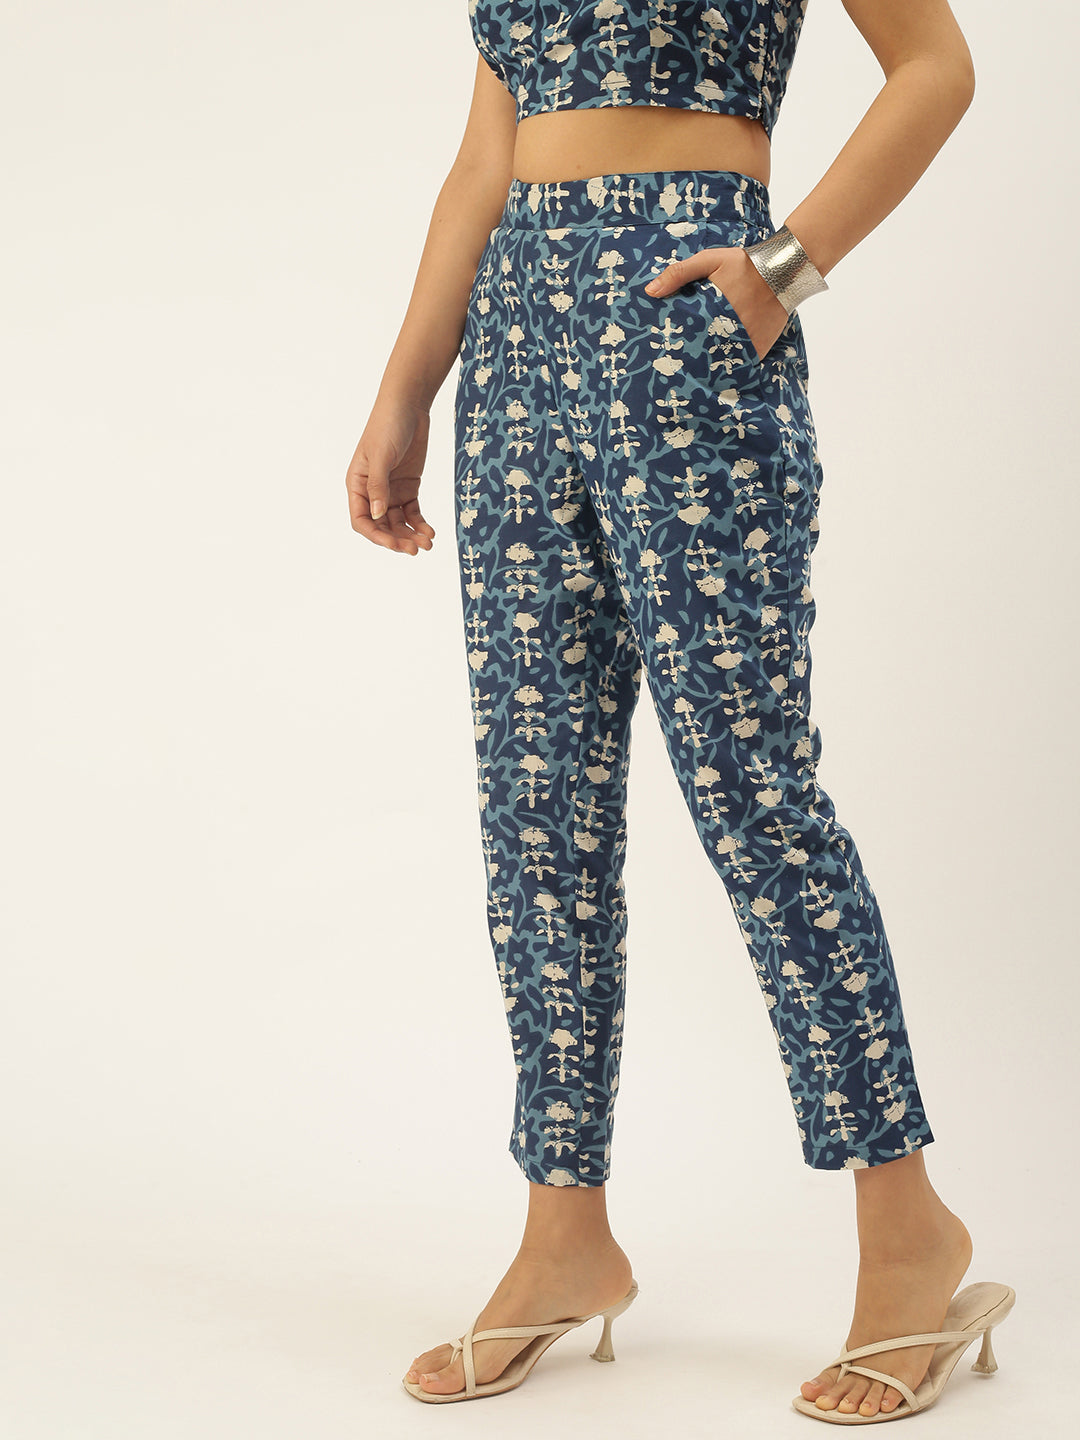 Shyla by FBB Regular Fit Women Multicolor Trousers - Buy Shyla by FBB  Regular Fit Women Multicolor Trousers Online at Best Prices in India |  Flipkart.com